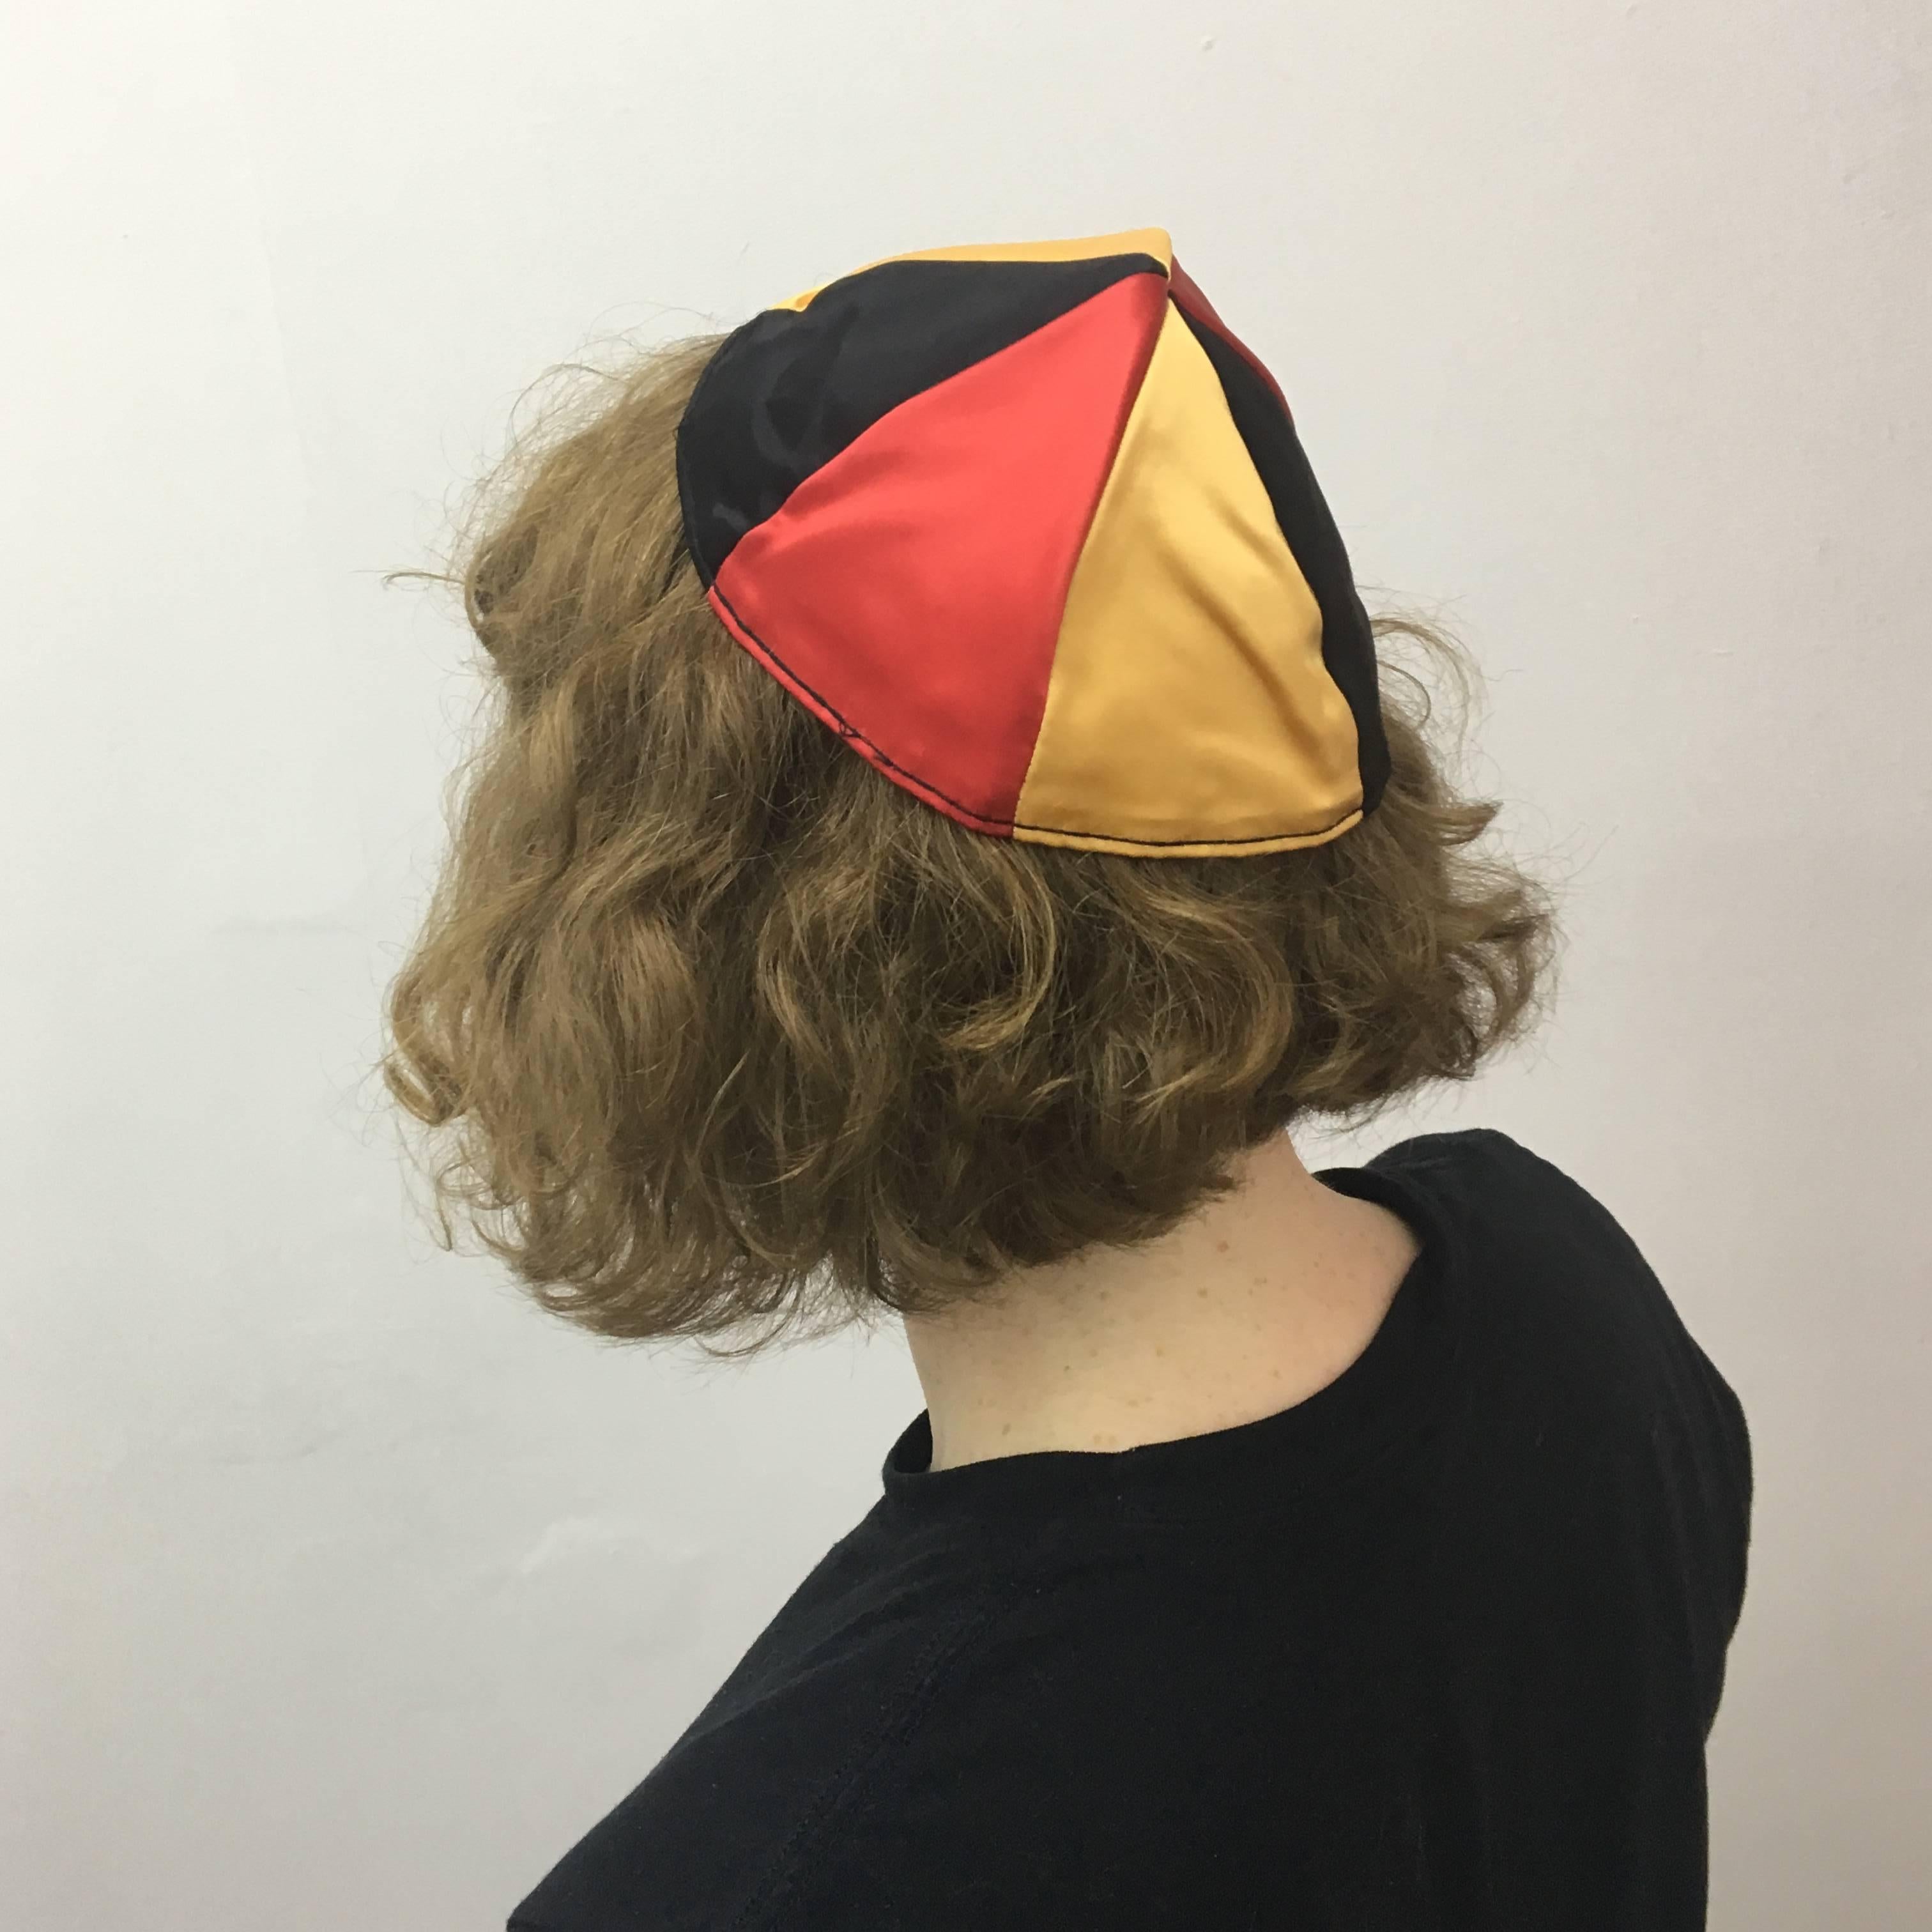 German Yarmulke (Thanks for Remembering), 1995
Satin yarmulke - red, black and gold
Signed

For decades, Leibowitz has been the New York art world’s master painter of abjection and neuroses, with mockingly self-abasing work that mixes elements of